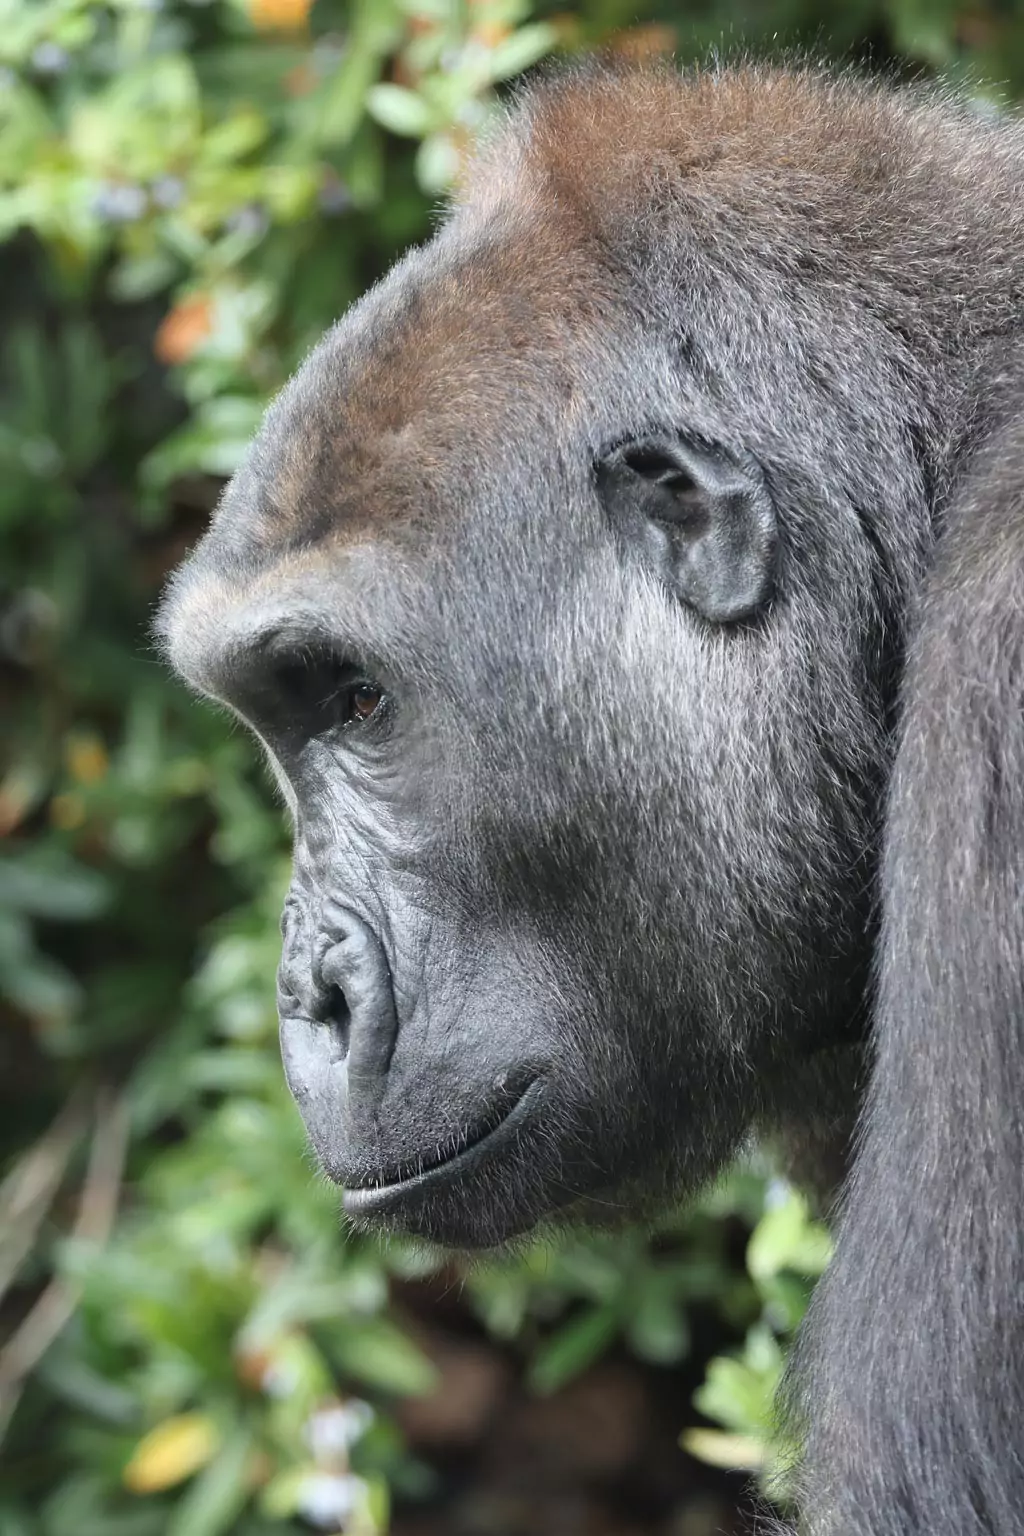 close up view of western gorilla